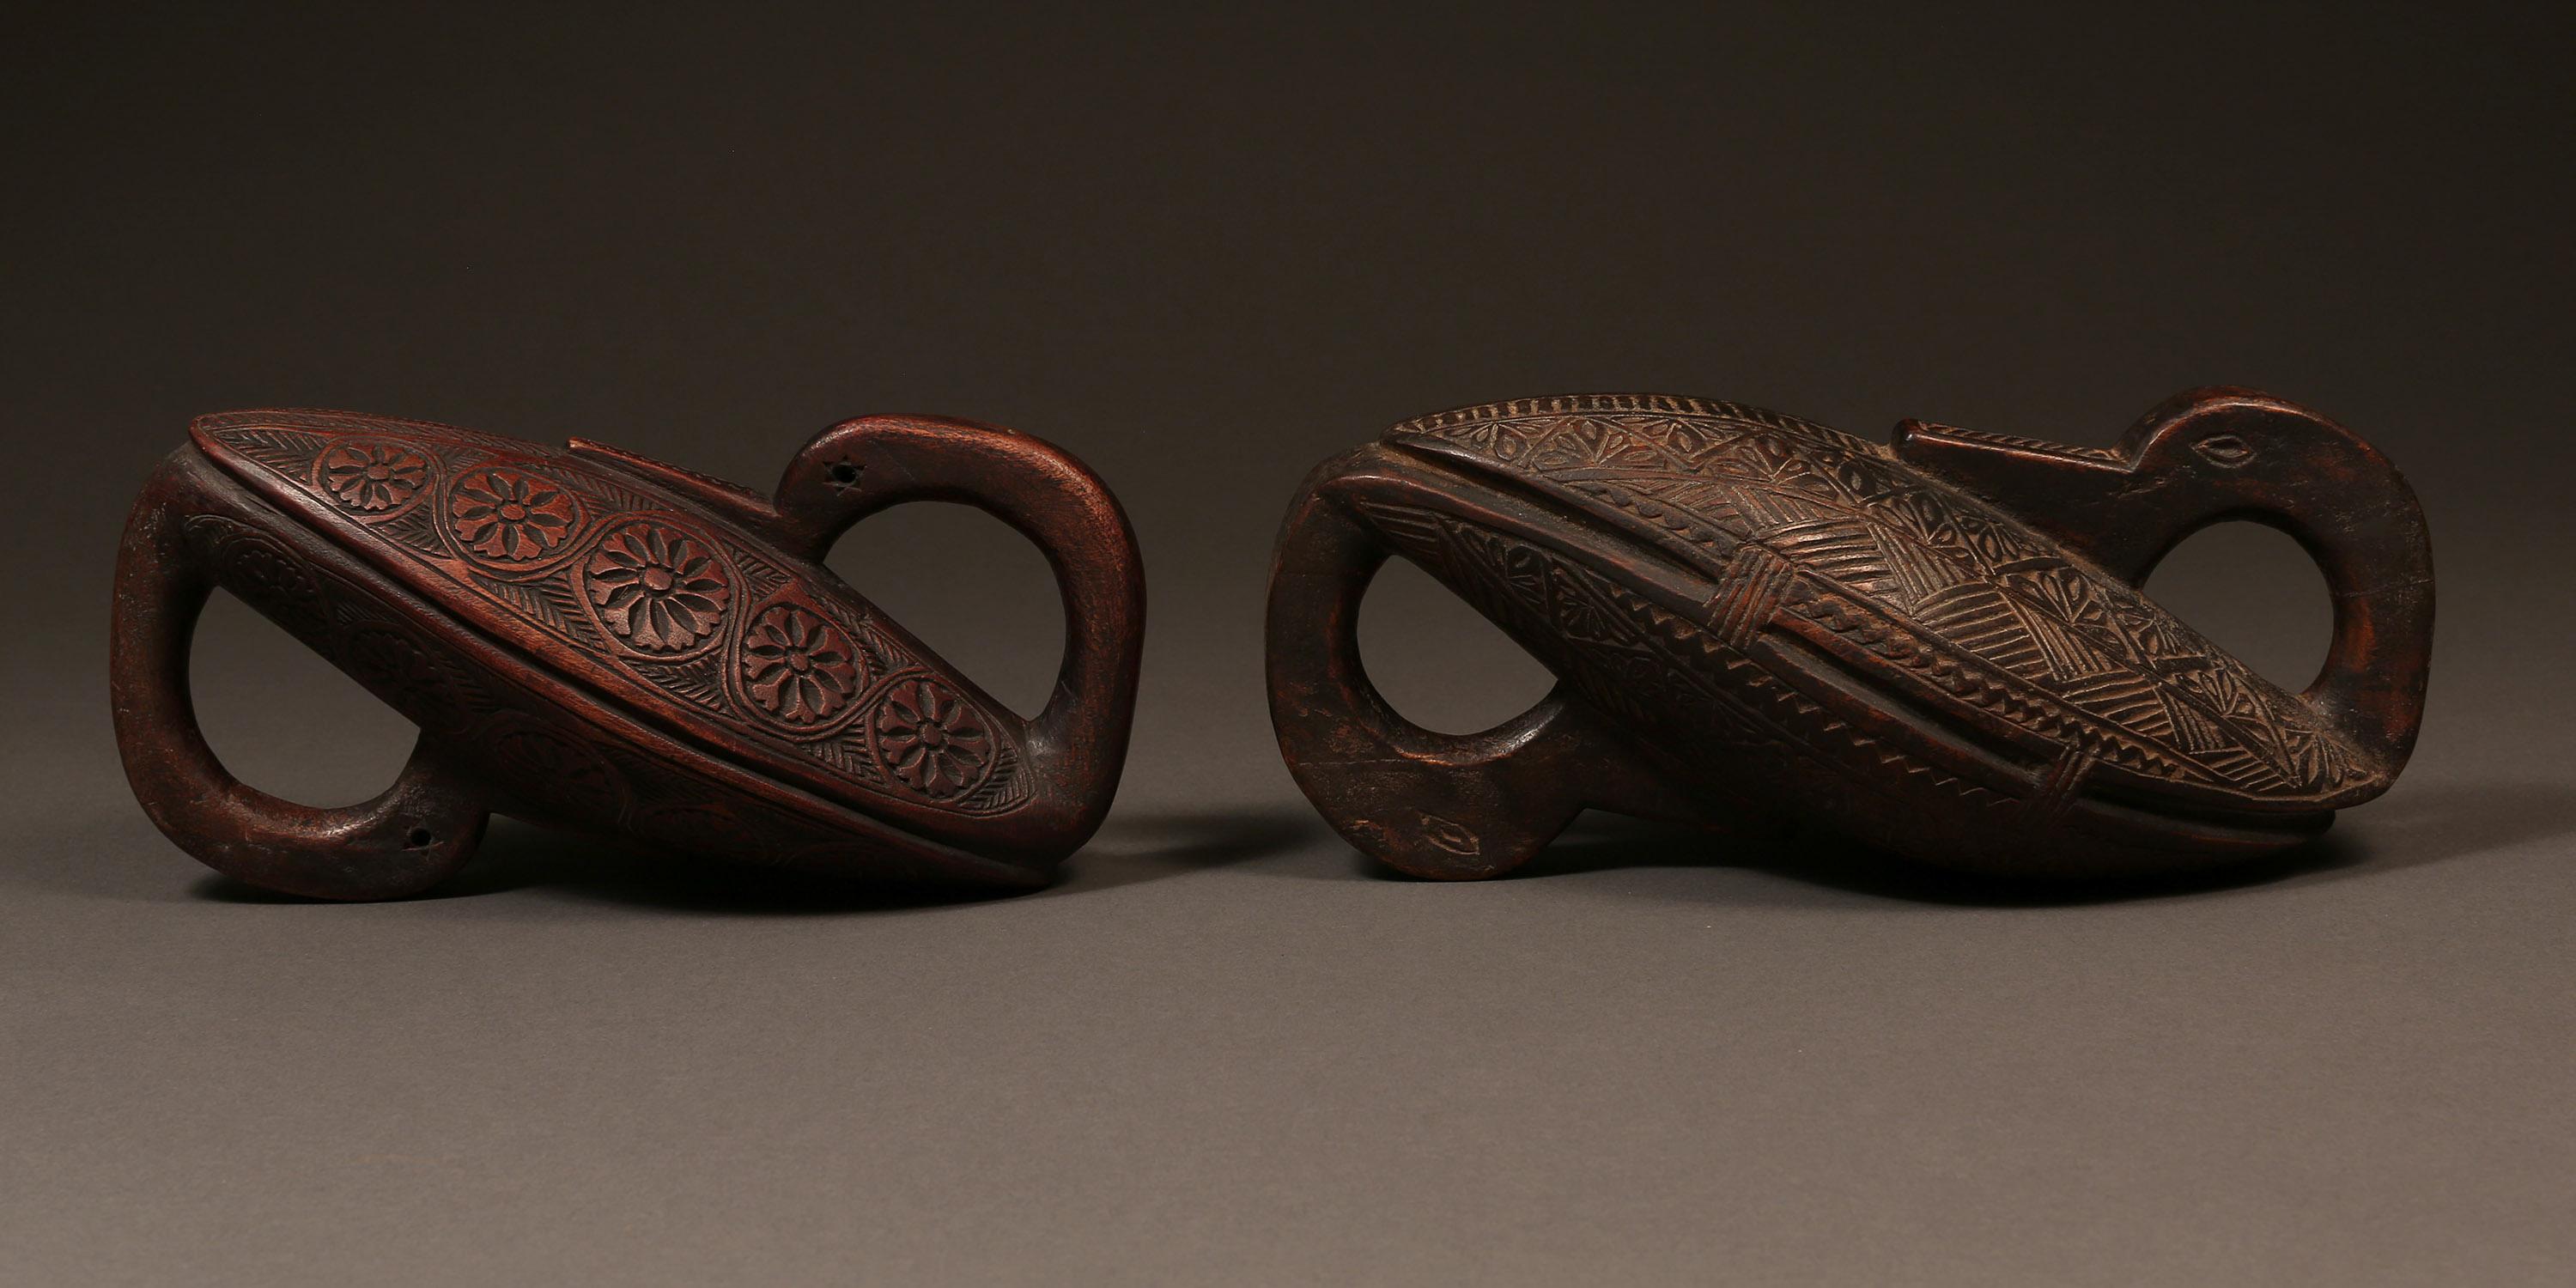 Pair of Carved Bird Motif Fastening Rings                                            
Middle Hills, Nepal                                                     
Early to mid-20th century                       
L: 9 in x H: 4.75 in D: 3.5 in   

A pair